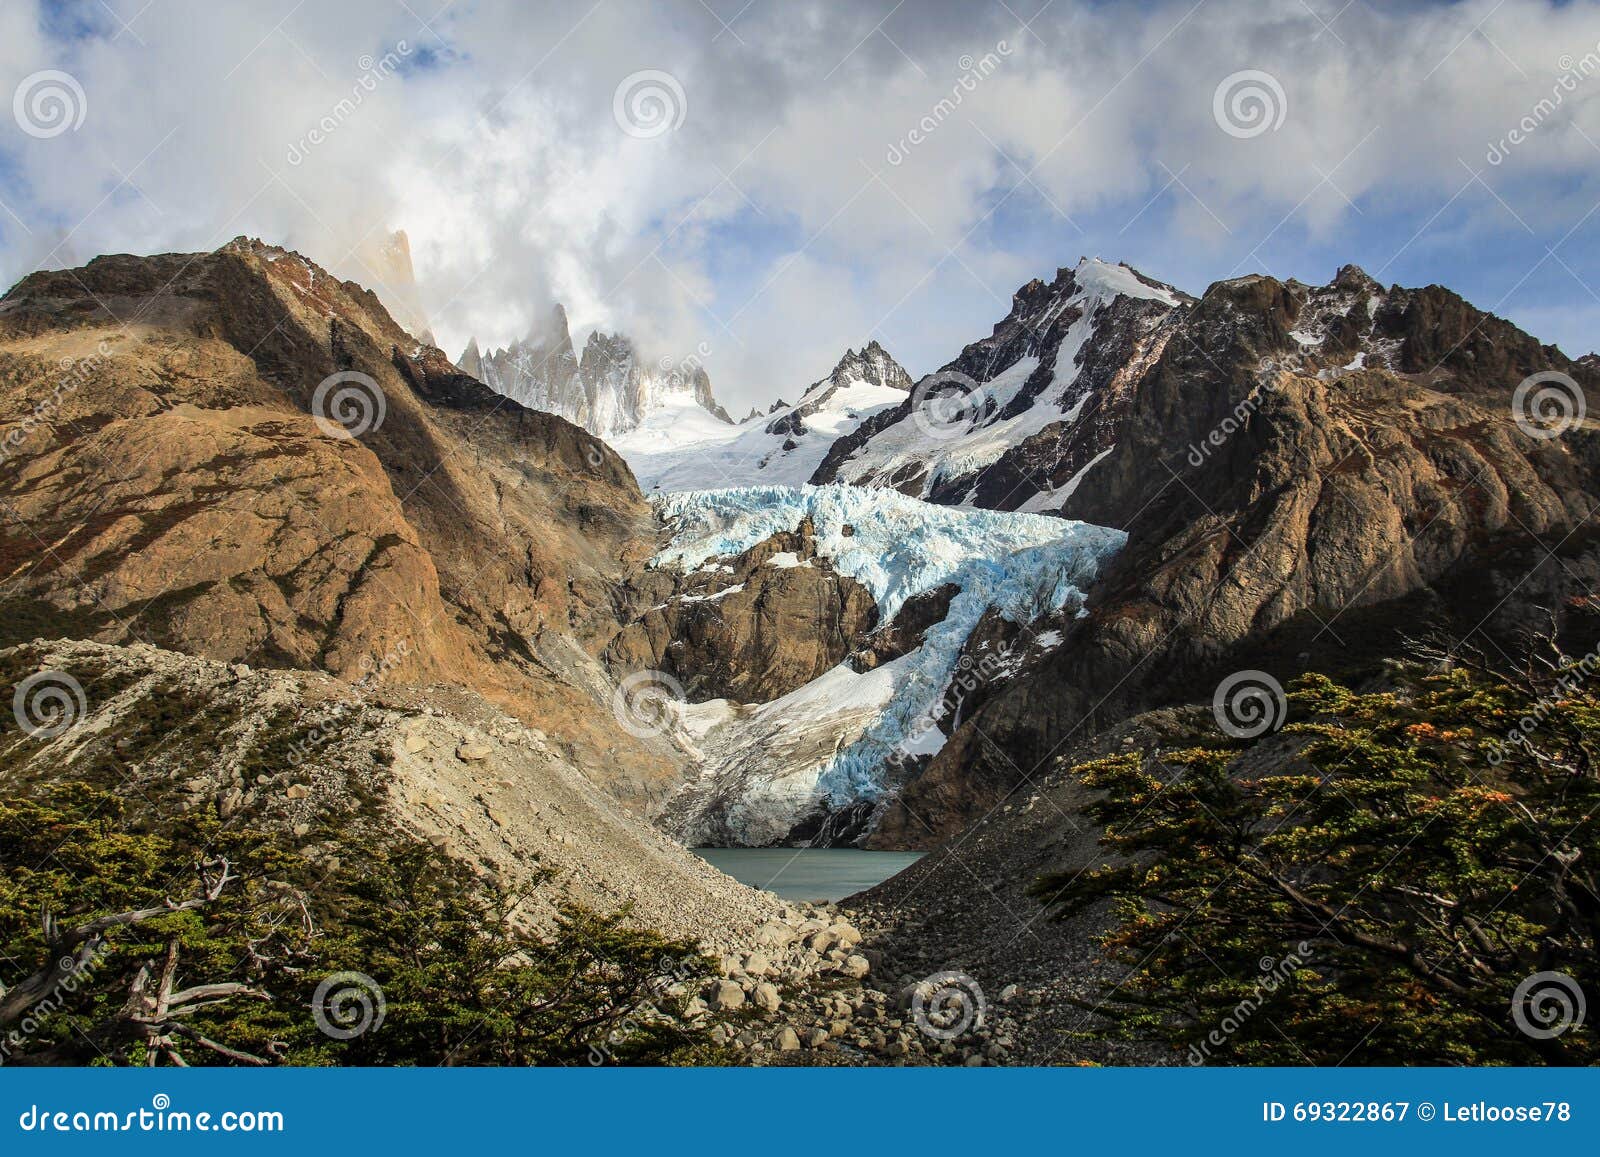 view on the mount fitzroy and glacier piedras blancas, southern patagonian ice field, argentina